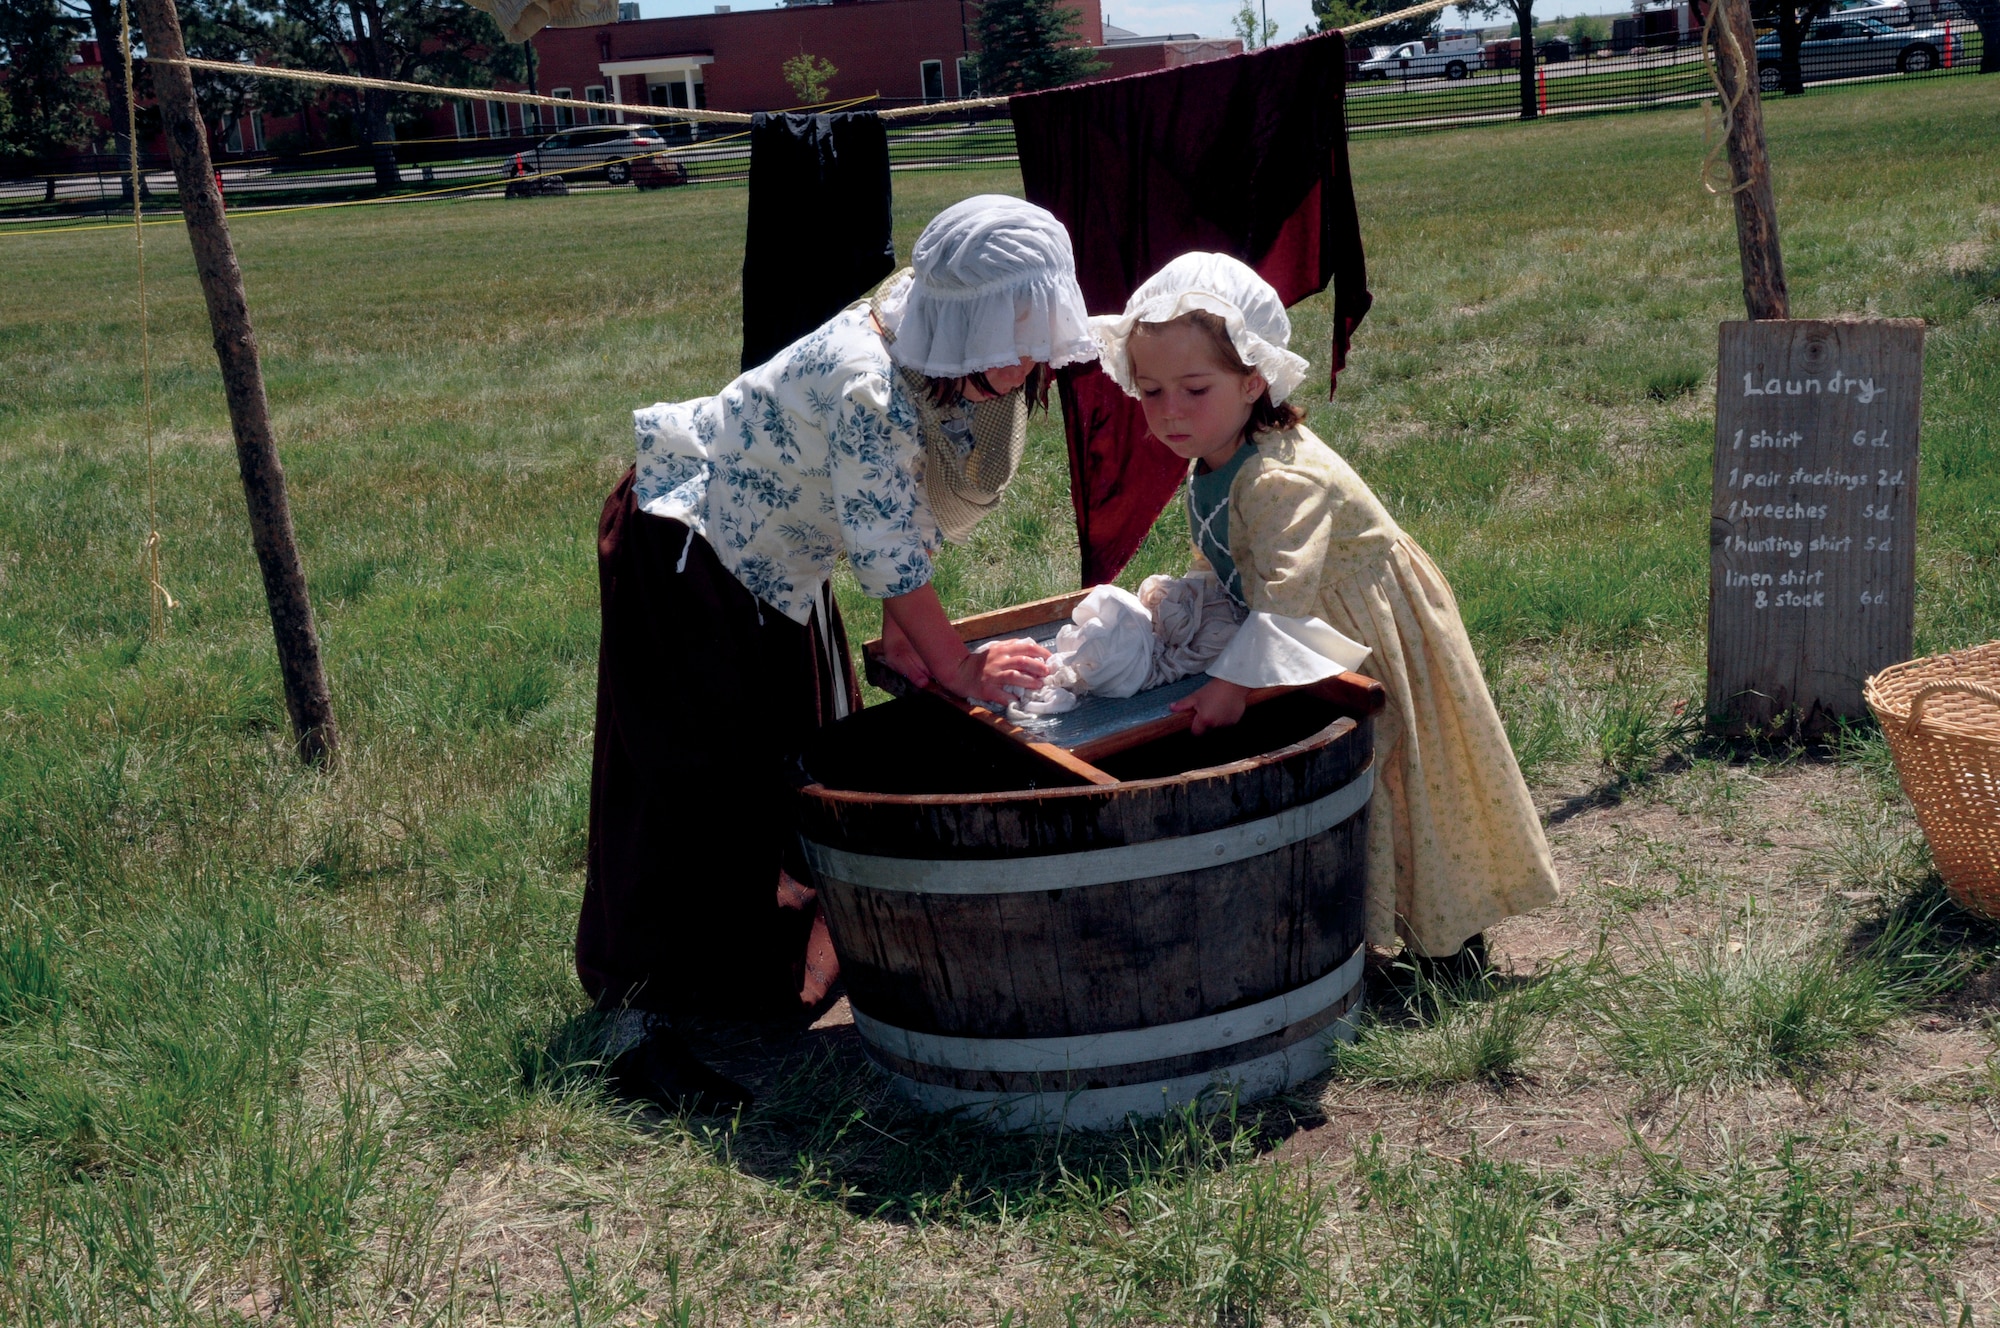 Olivia Young, age 9, and her sister Addison Young age 3, from Wheatridge, Colo., demonstrate time era clothes washing during Fort D.A. Russell Days here July 23. (U.S. Air Force photo by Blaze Lipowski)